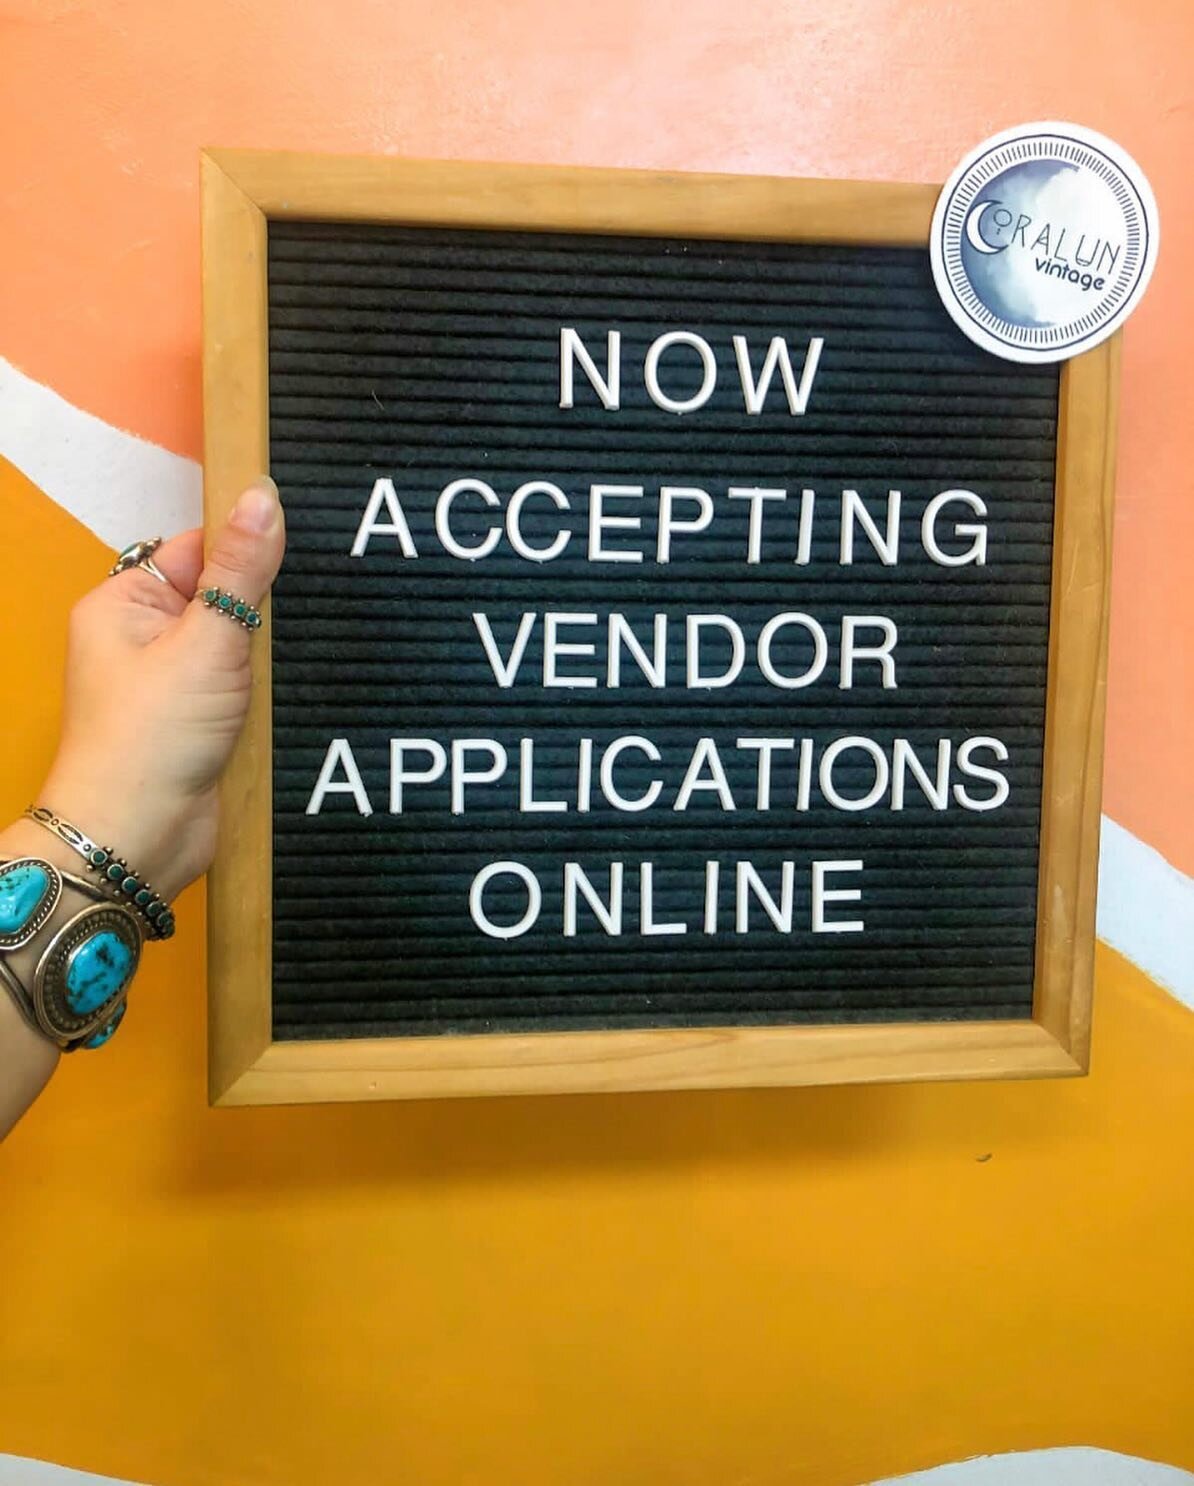 The sign is pretty self explanatory. We love the current vendors we have in the shop and are making room for more in the coming months. The Vendor applications are live on our website www.coralunvintage.com under &ldquo;vendors&rdquo; or if you are v